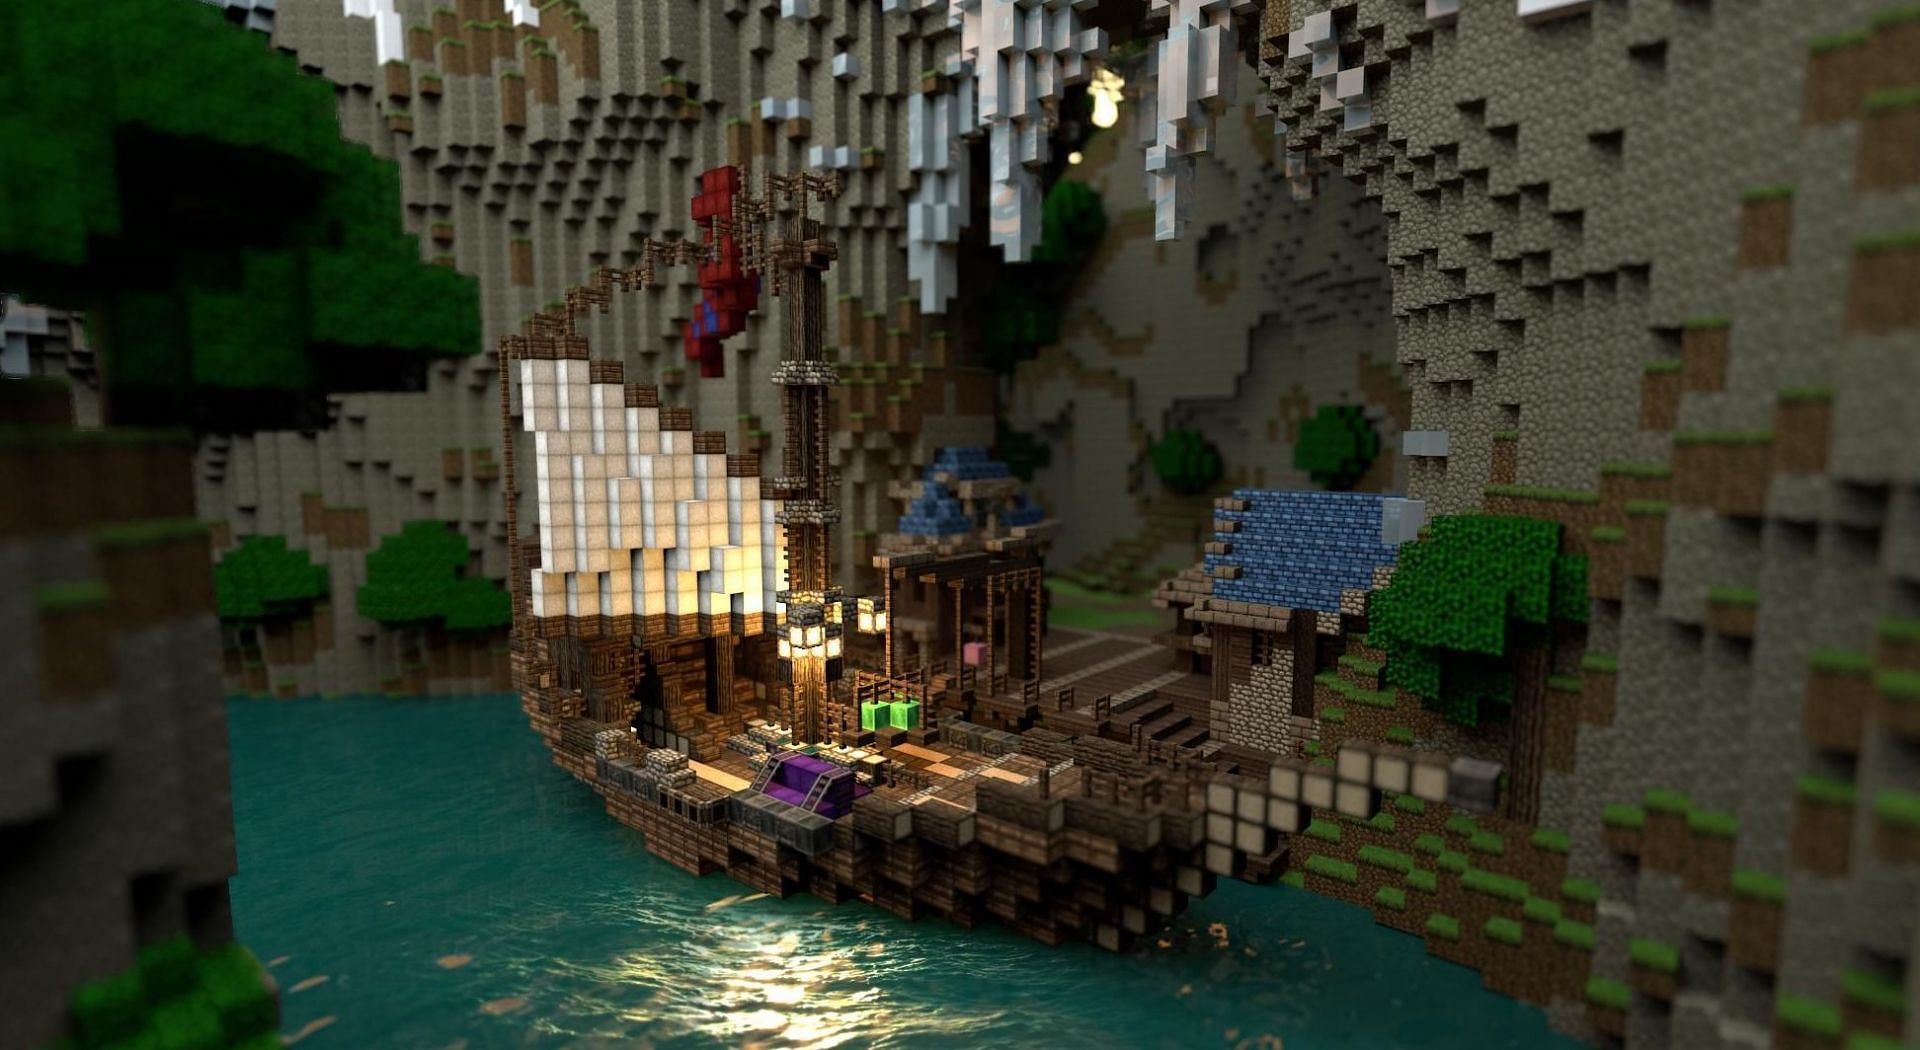 Spice Up Your Minecraft with These 6 Killer Mods